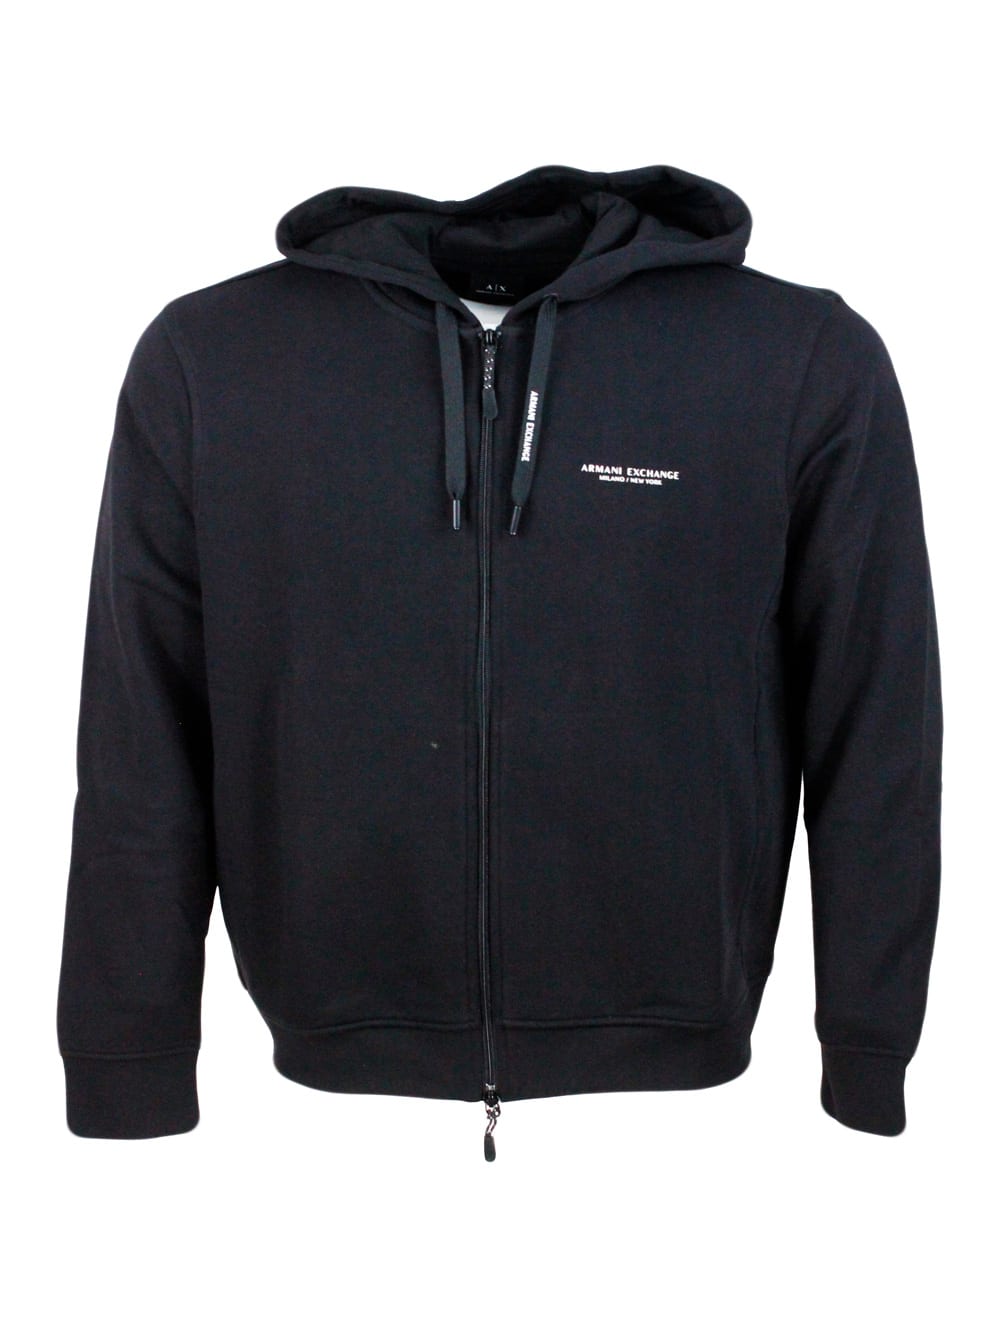 Long-sleeved Full Zip Drawstring Hoodie With Small Logo On The Chest